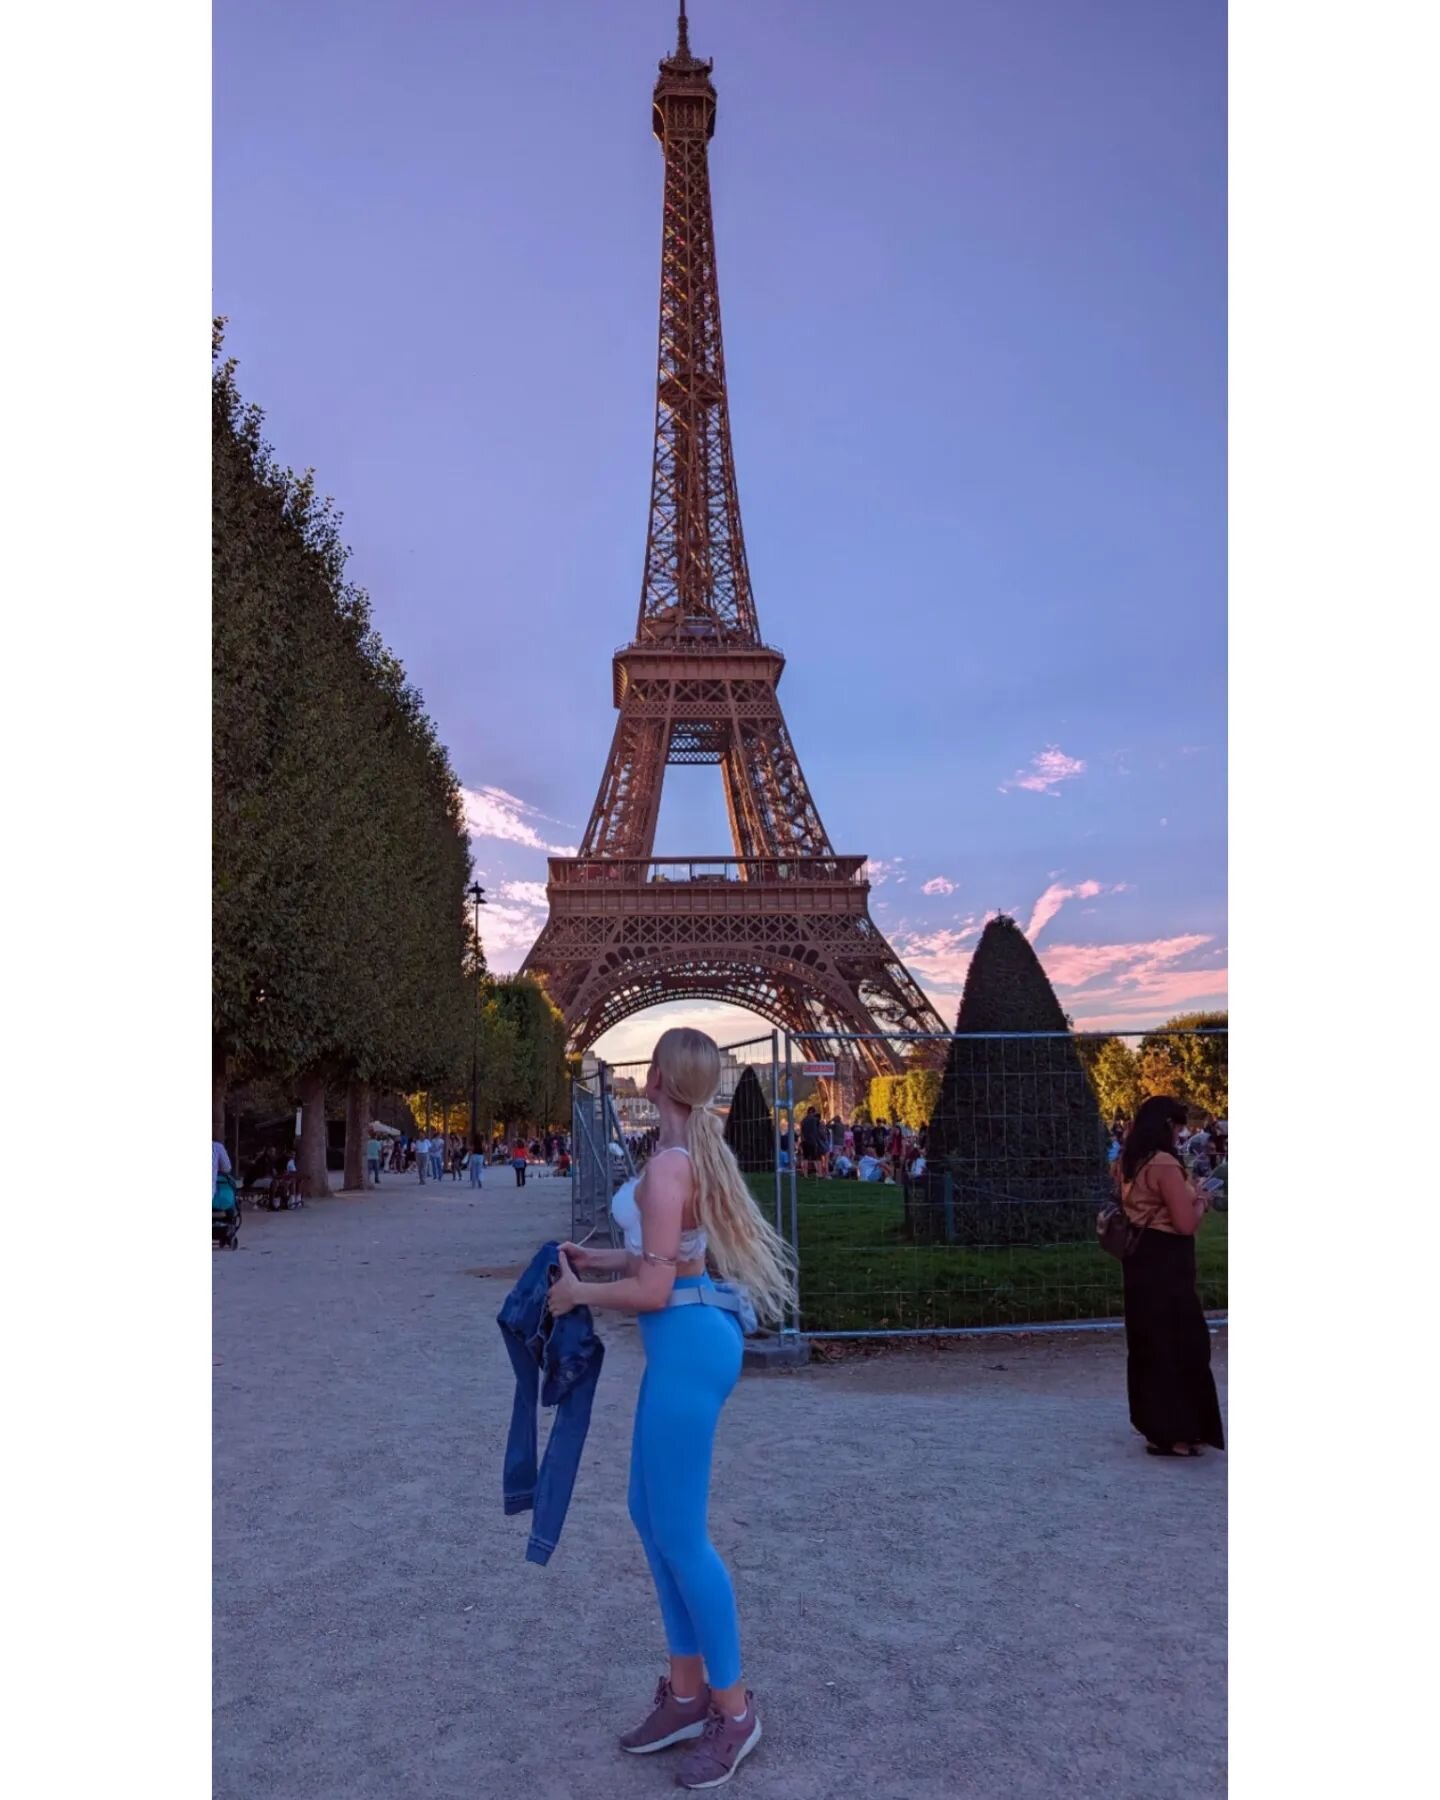 Last night was one of the most beautiful evenings of my life

So grateful to be on this Paris adventure

Whoever is hesitant to travel solo - do it ❤️